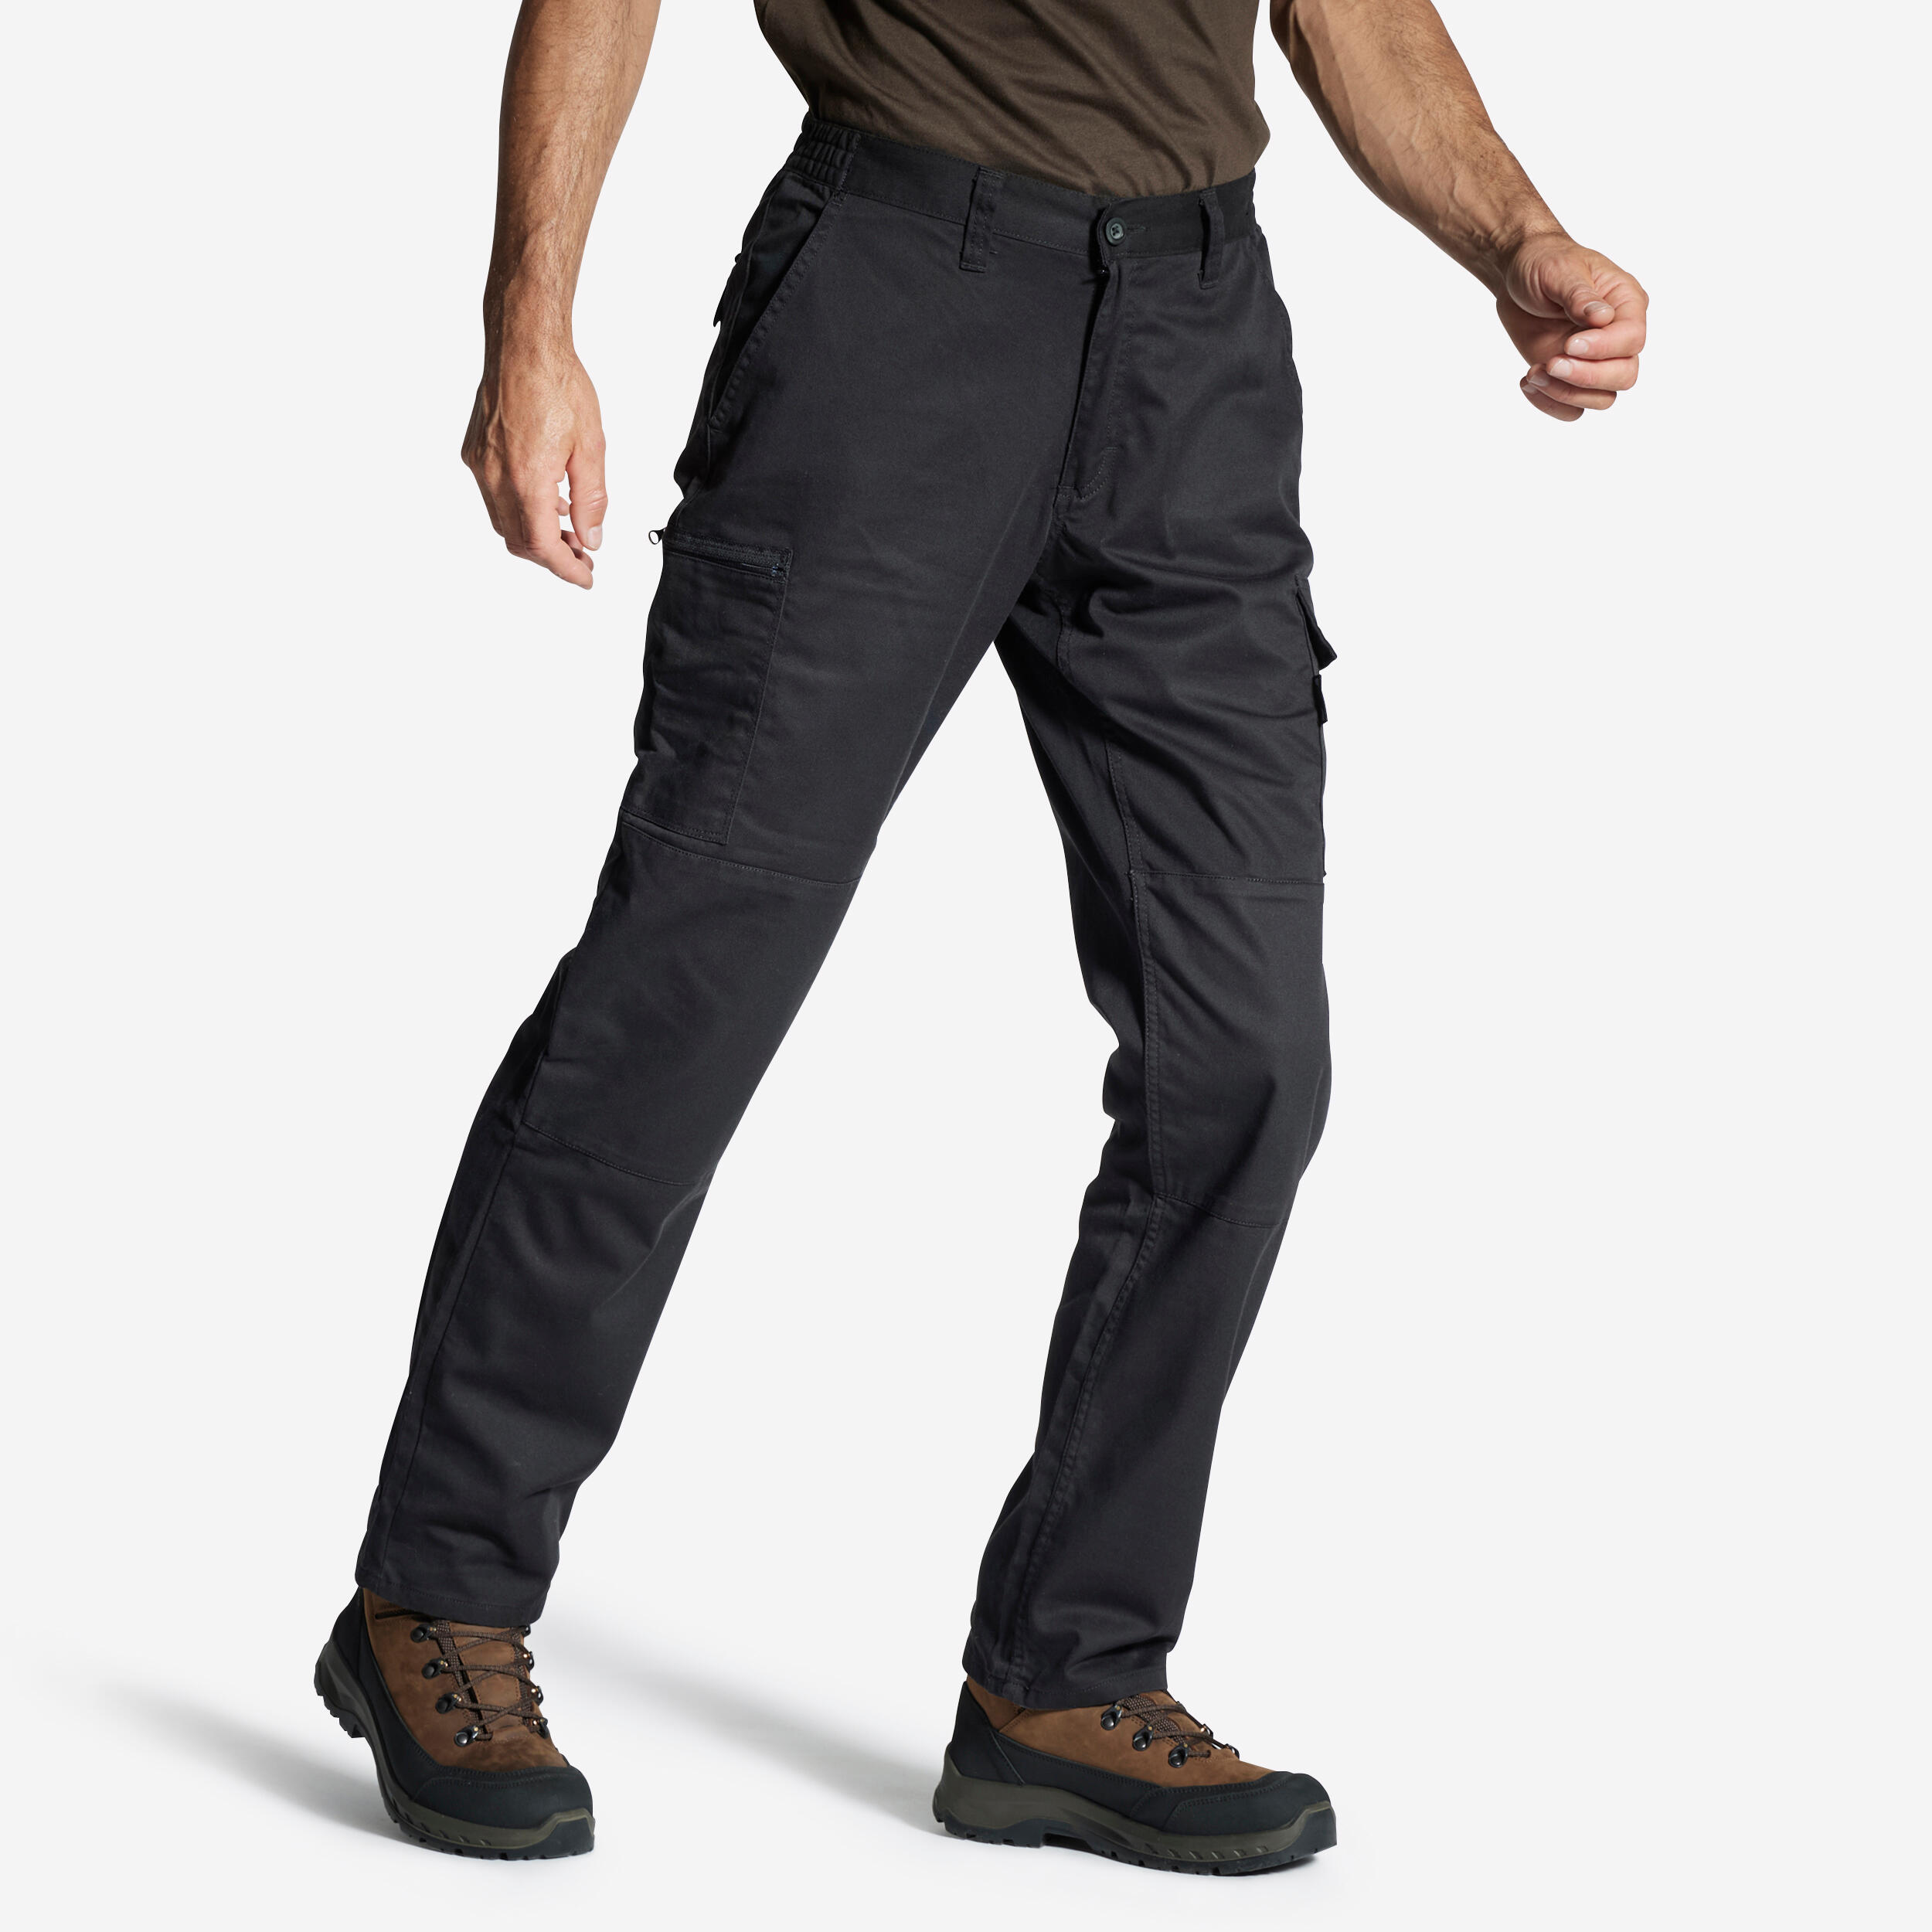 HUNTING OVER TROUSERS SUPERTRACK 500 BROWN SOLOGNAC | Decathlon